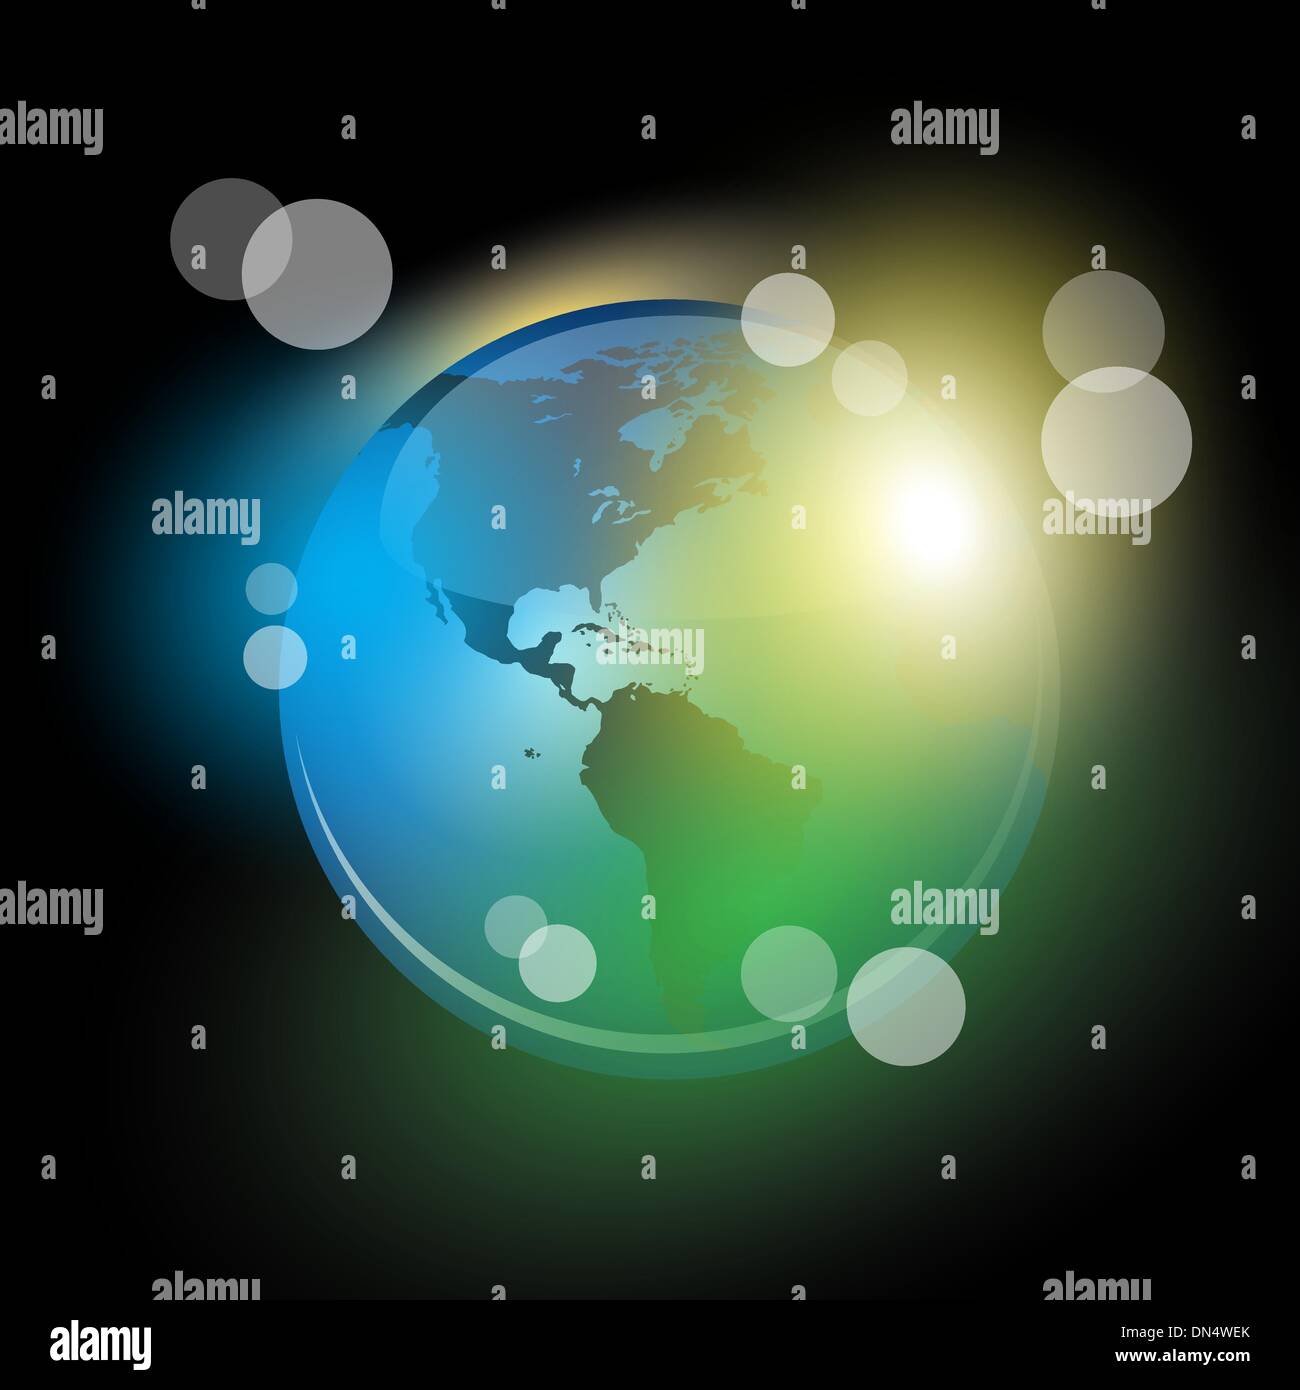 Globe and map vector background Stock Vector